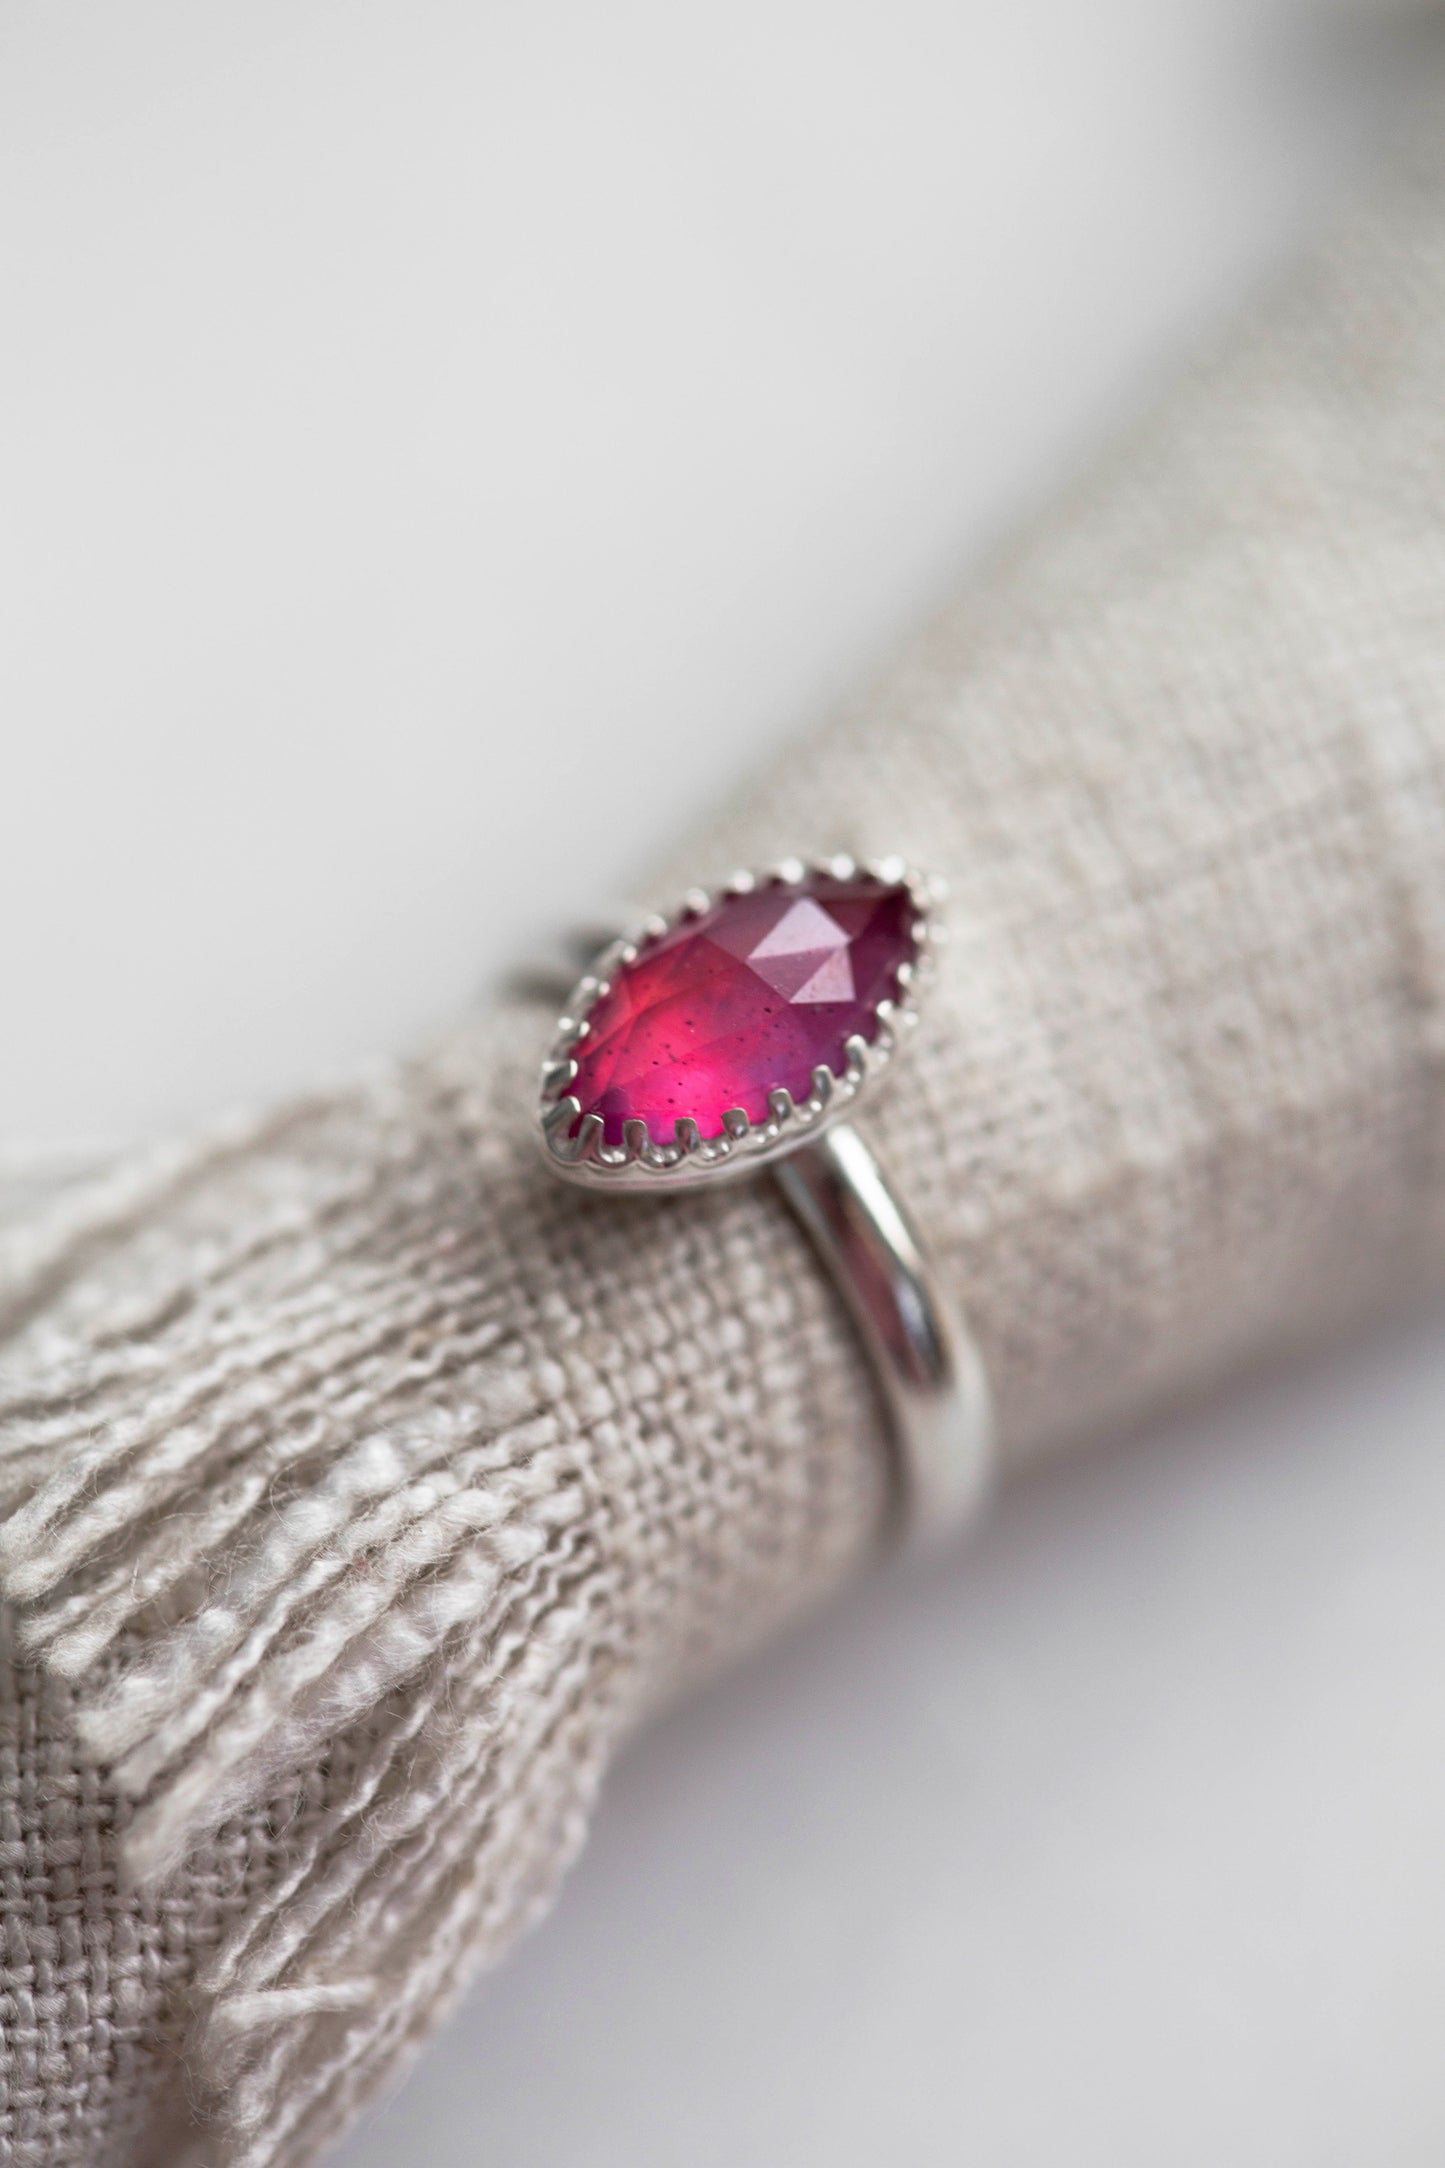 Size 7.75 | Pink Sapphire Ring | #6